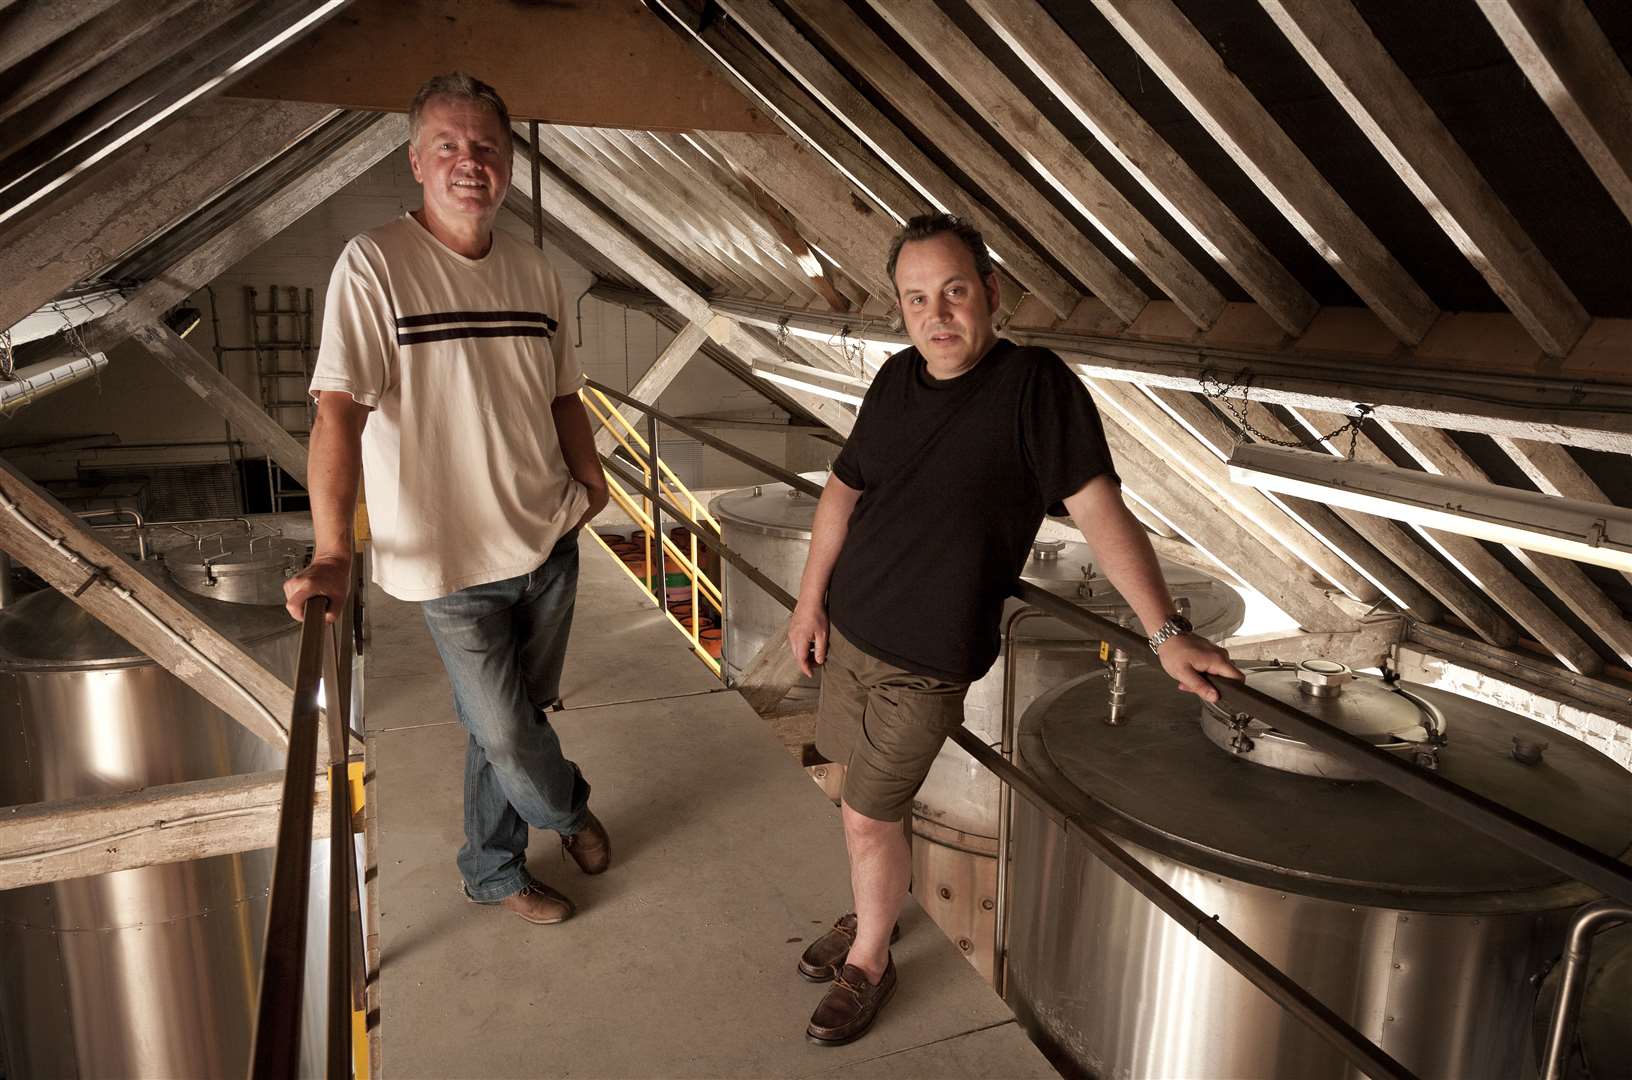 Paul Herbert, left, founded Kent Brewery with business partner Toby Simmonds in 2010